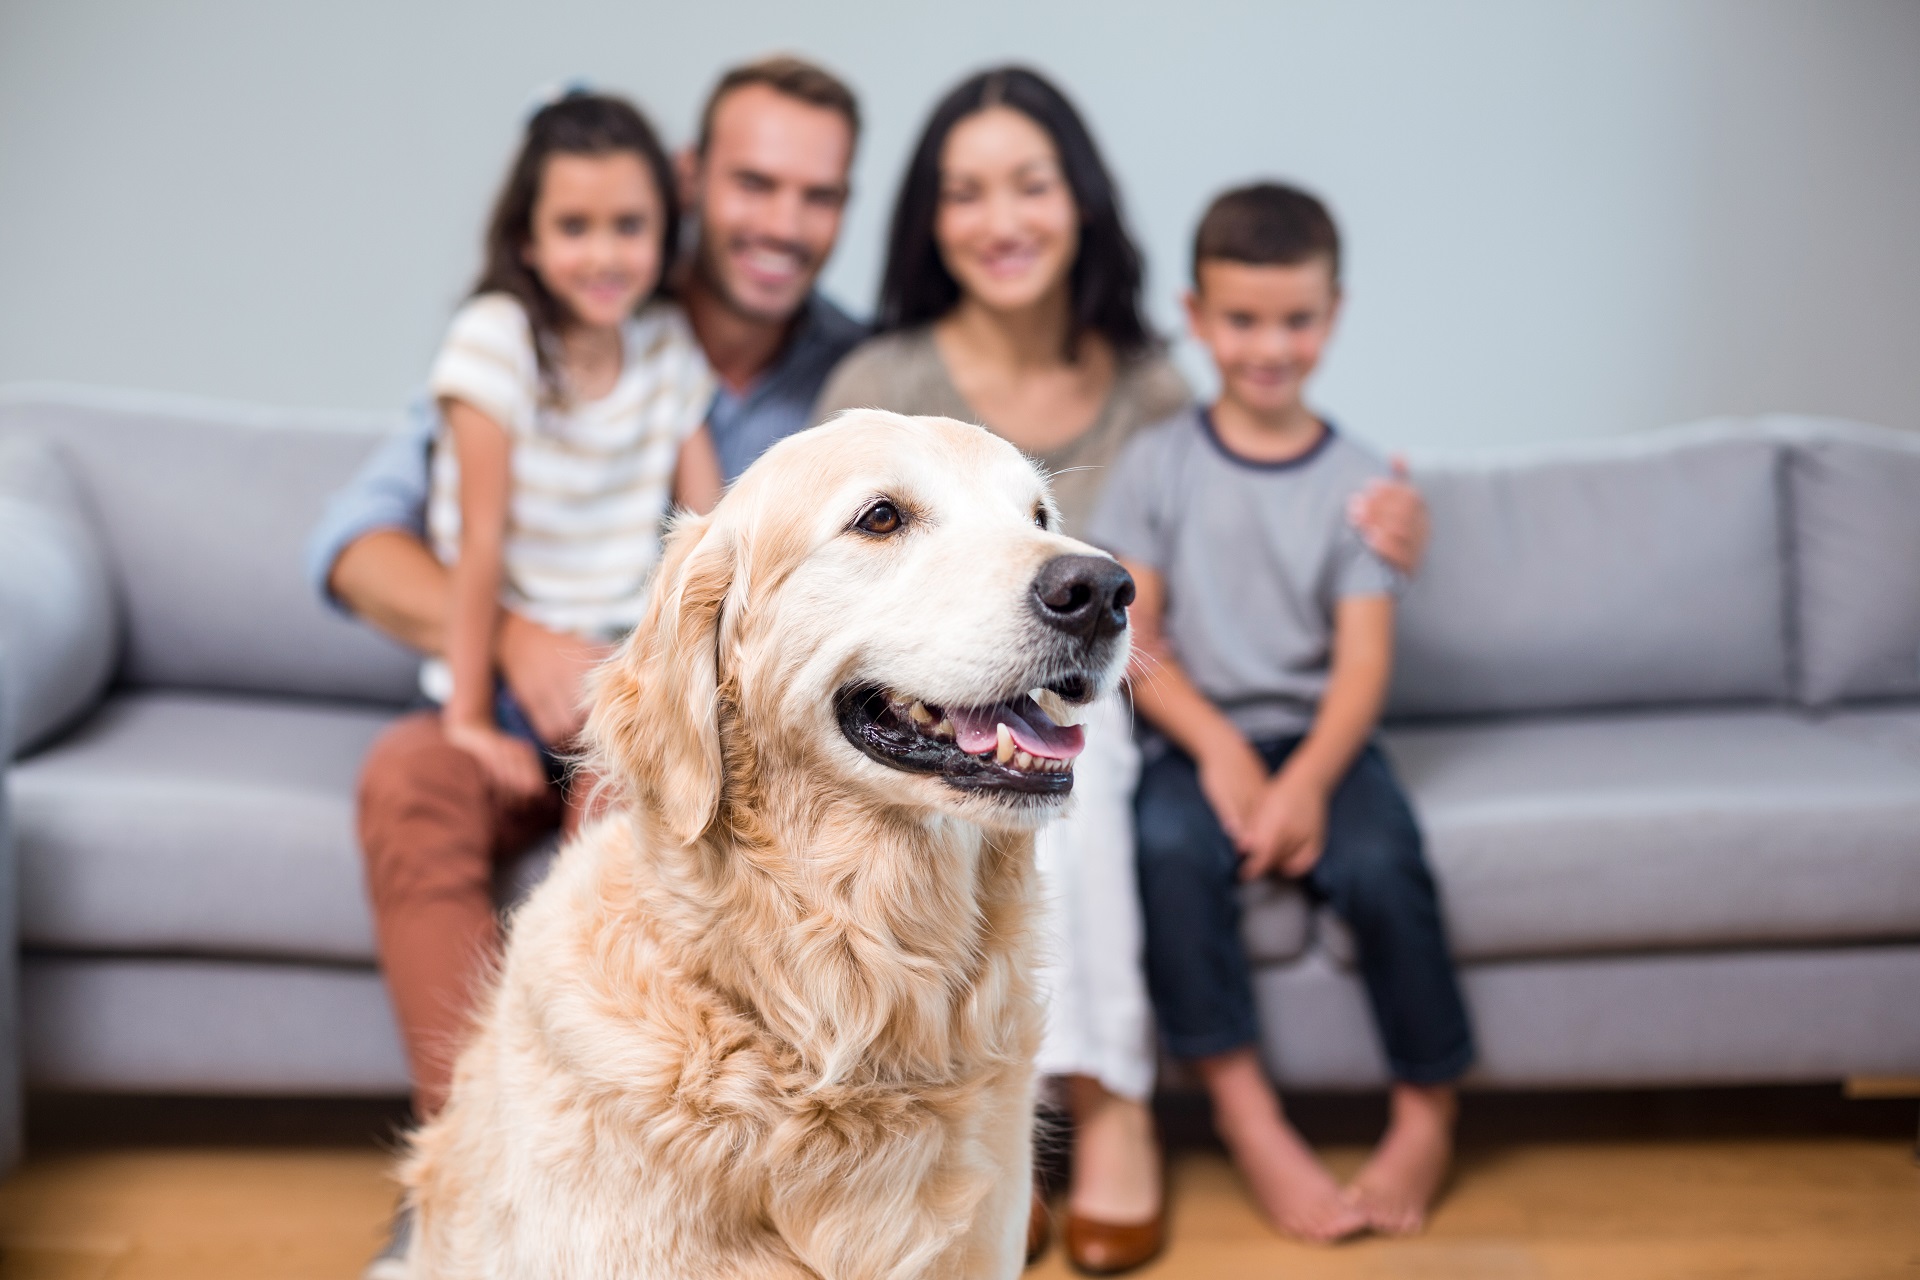 Pet in living room and family sitting on sofa in background